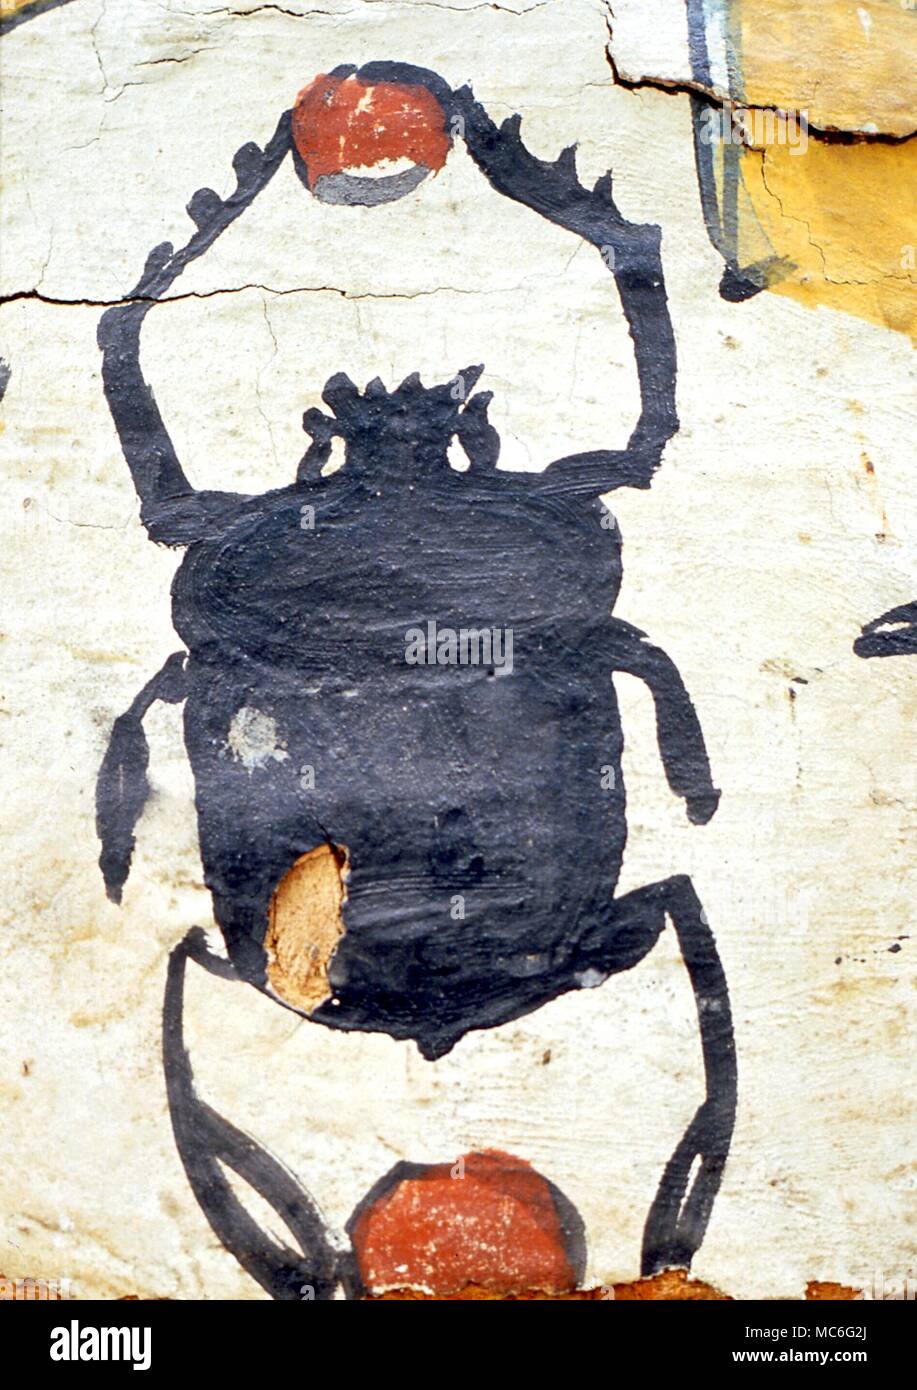 ANIMALS - Scarabeus beetle, holding an image of the Sun, symbol of Horus. Detail from a mummy of the Ptolemaic period from the Karnak area of Egypt Stock Photo